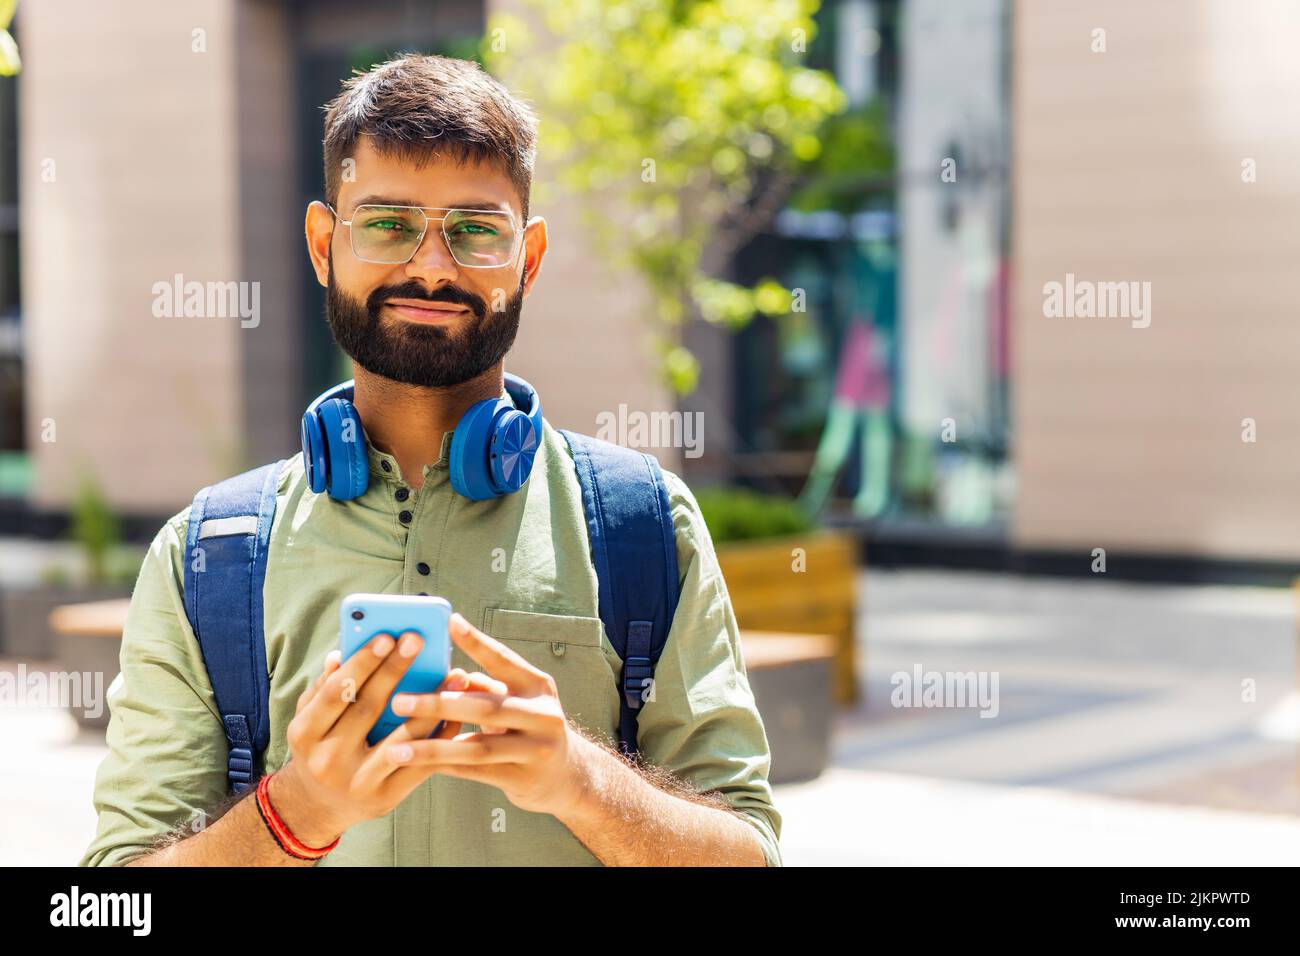 indian student with blue headset and backpack holding smartphone and looking at camera at sunny day Stock Photo